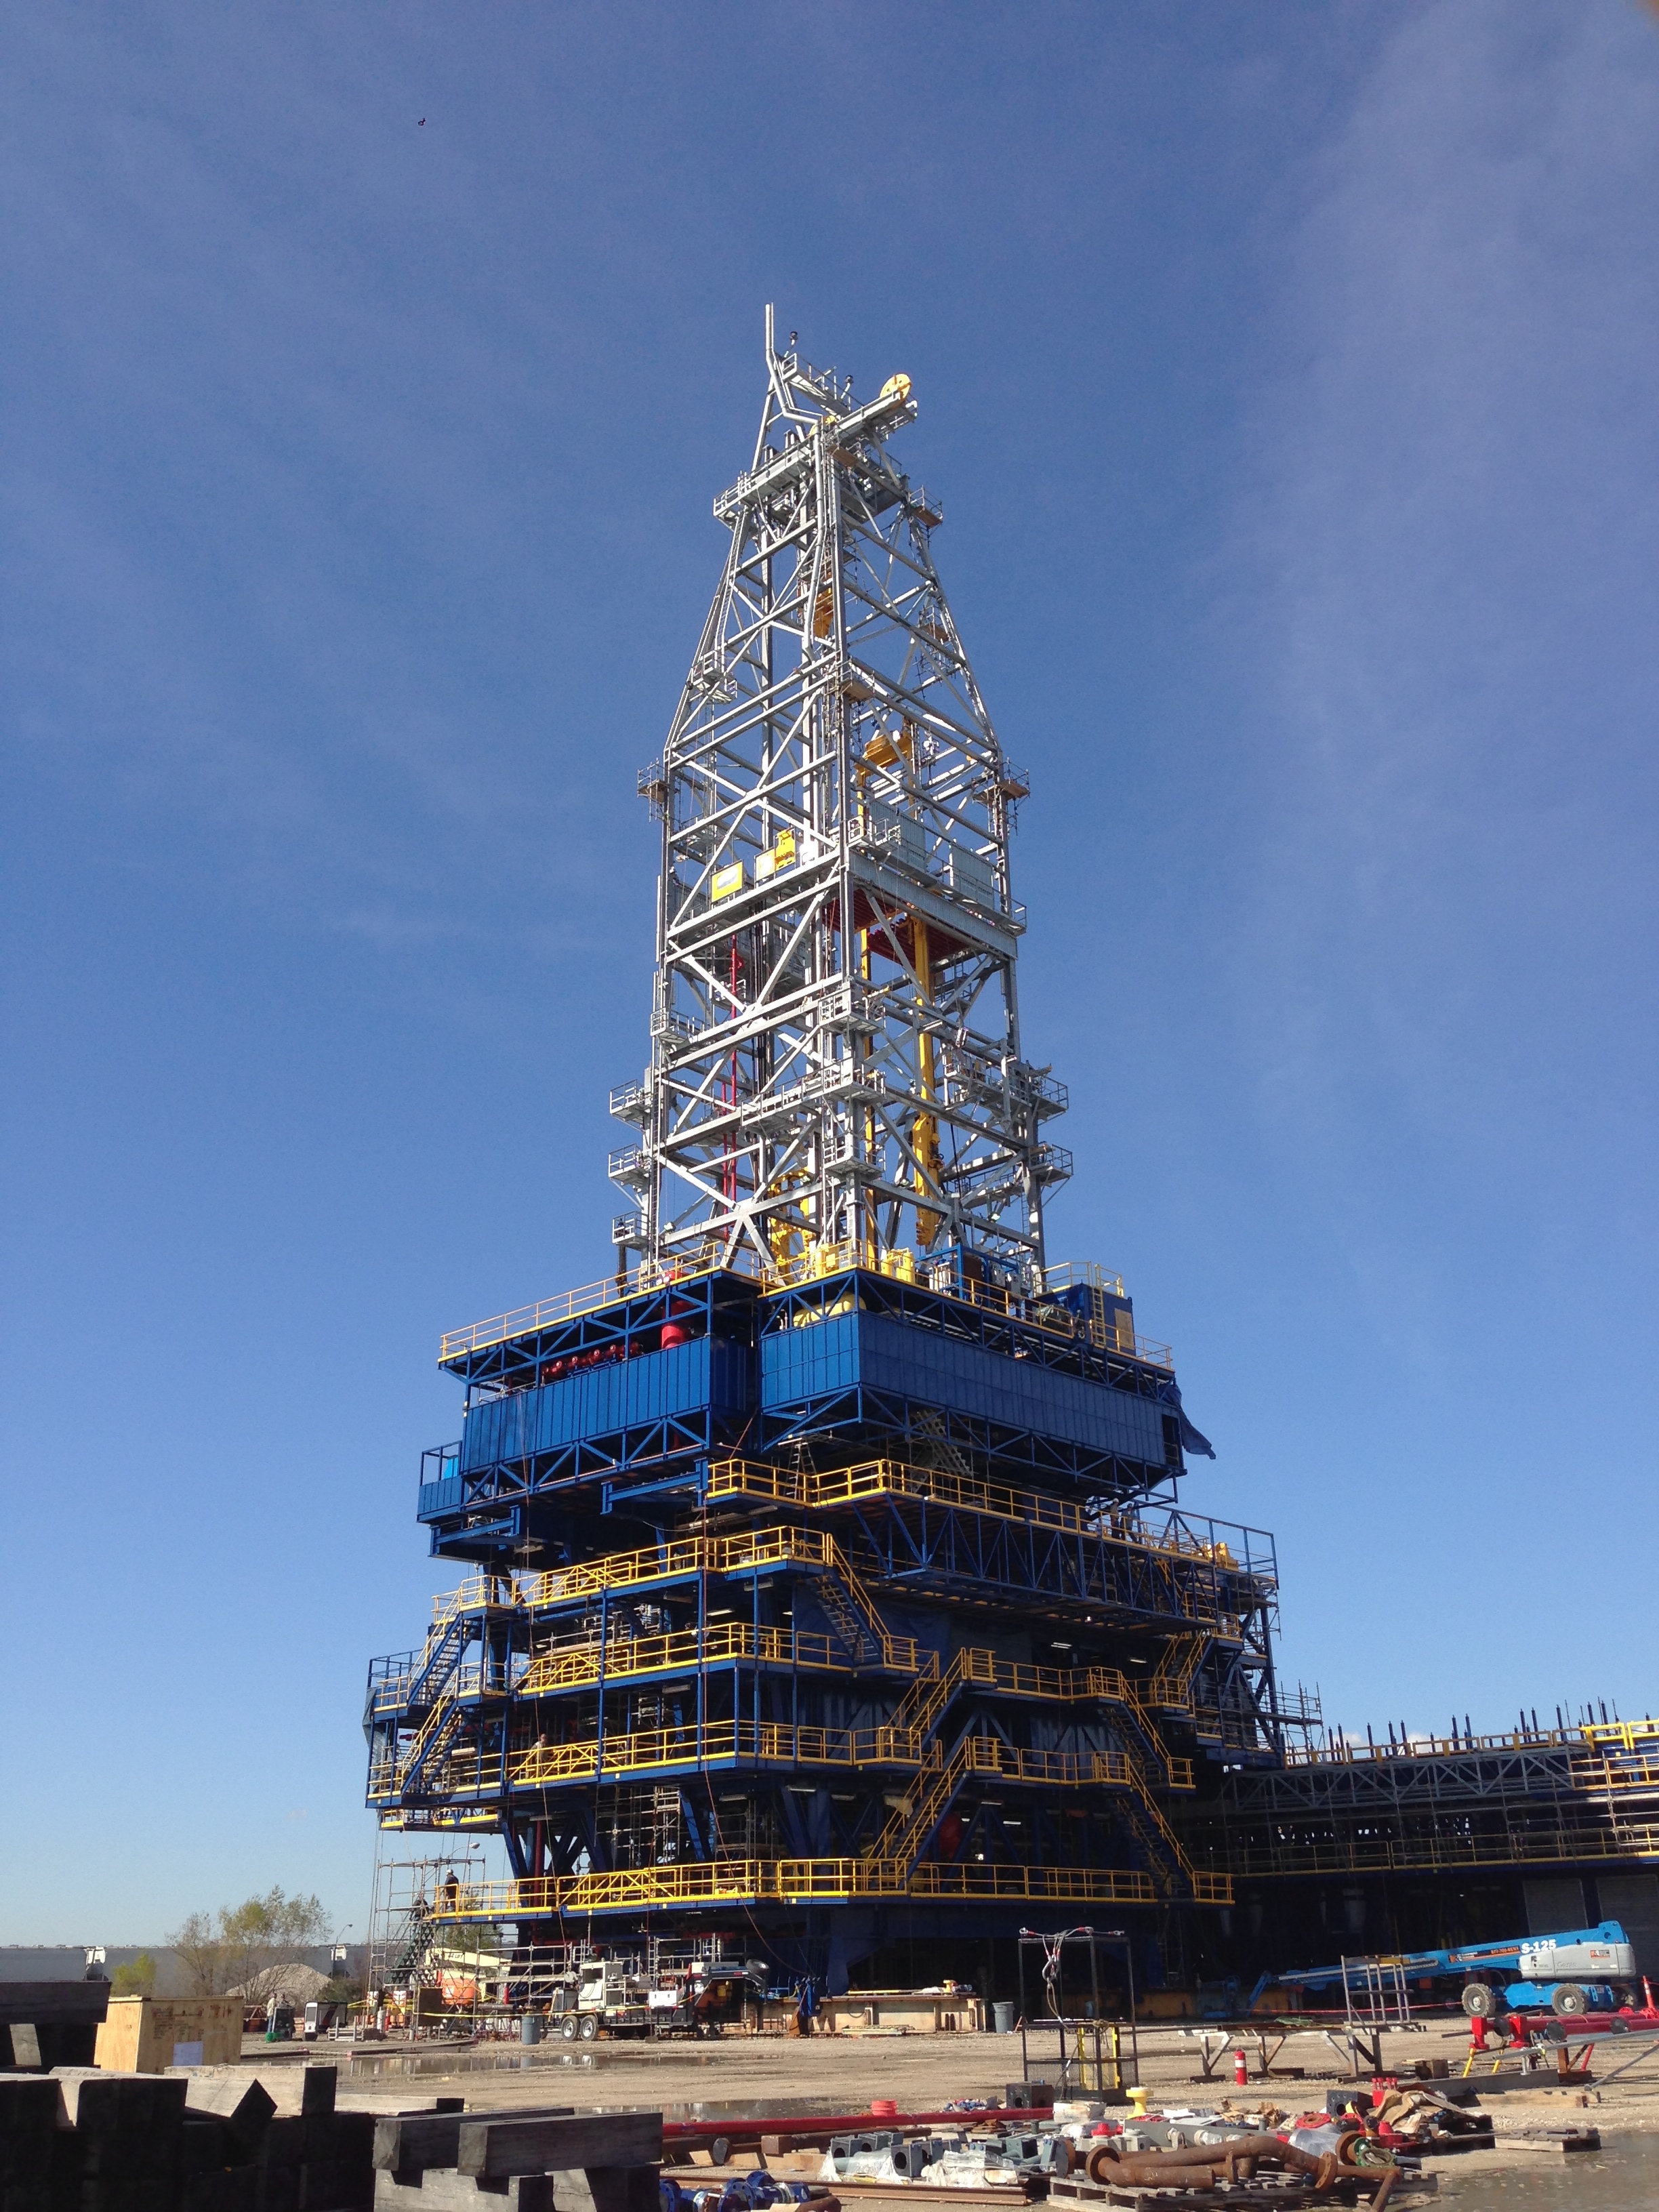 LoneStar Energy Fabrication served as the primary fabricator for drilling module on the $5 billion Olympus project that required more than 650,000 man-hours to complete.  Olympus is now in operation.